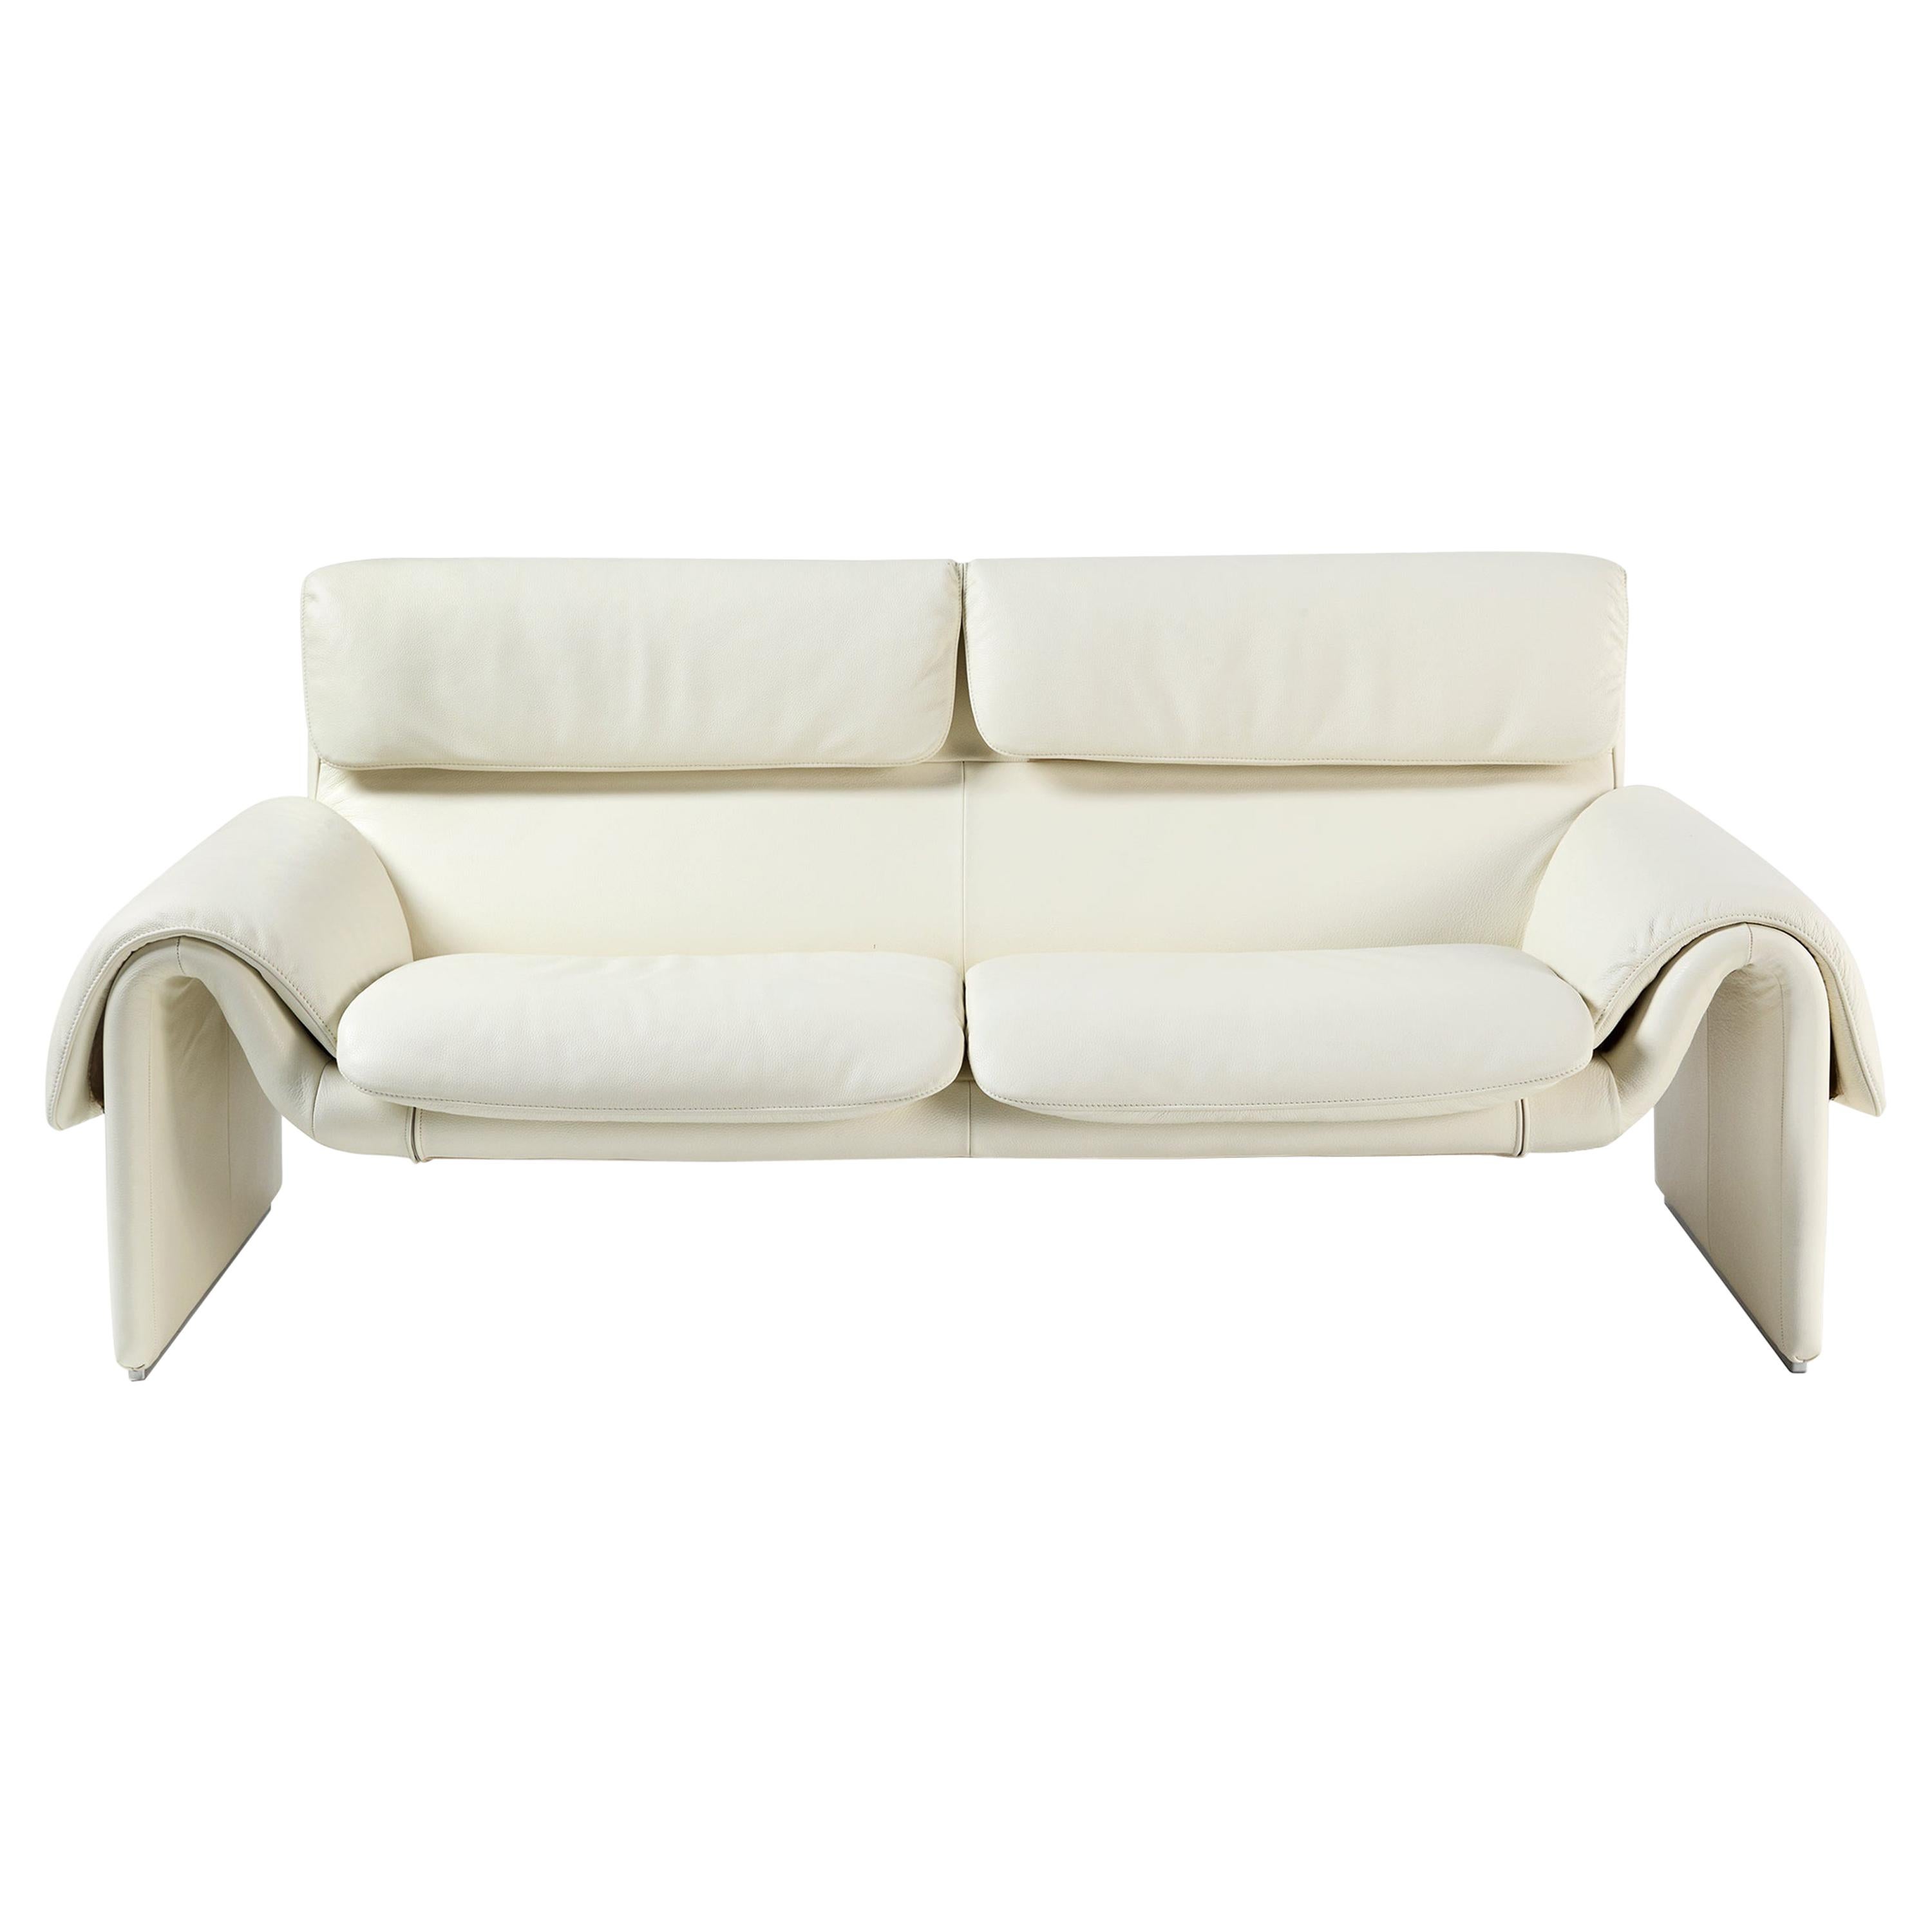 For Sale: White (Snow) DS-2011 Bauhaus Leather Two-Seat Sofa by De Sede